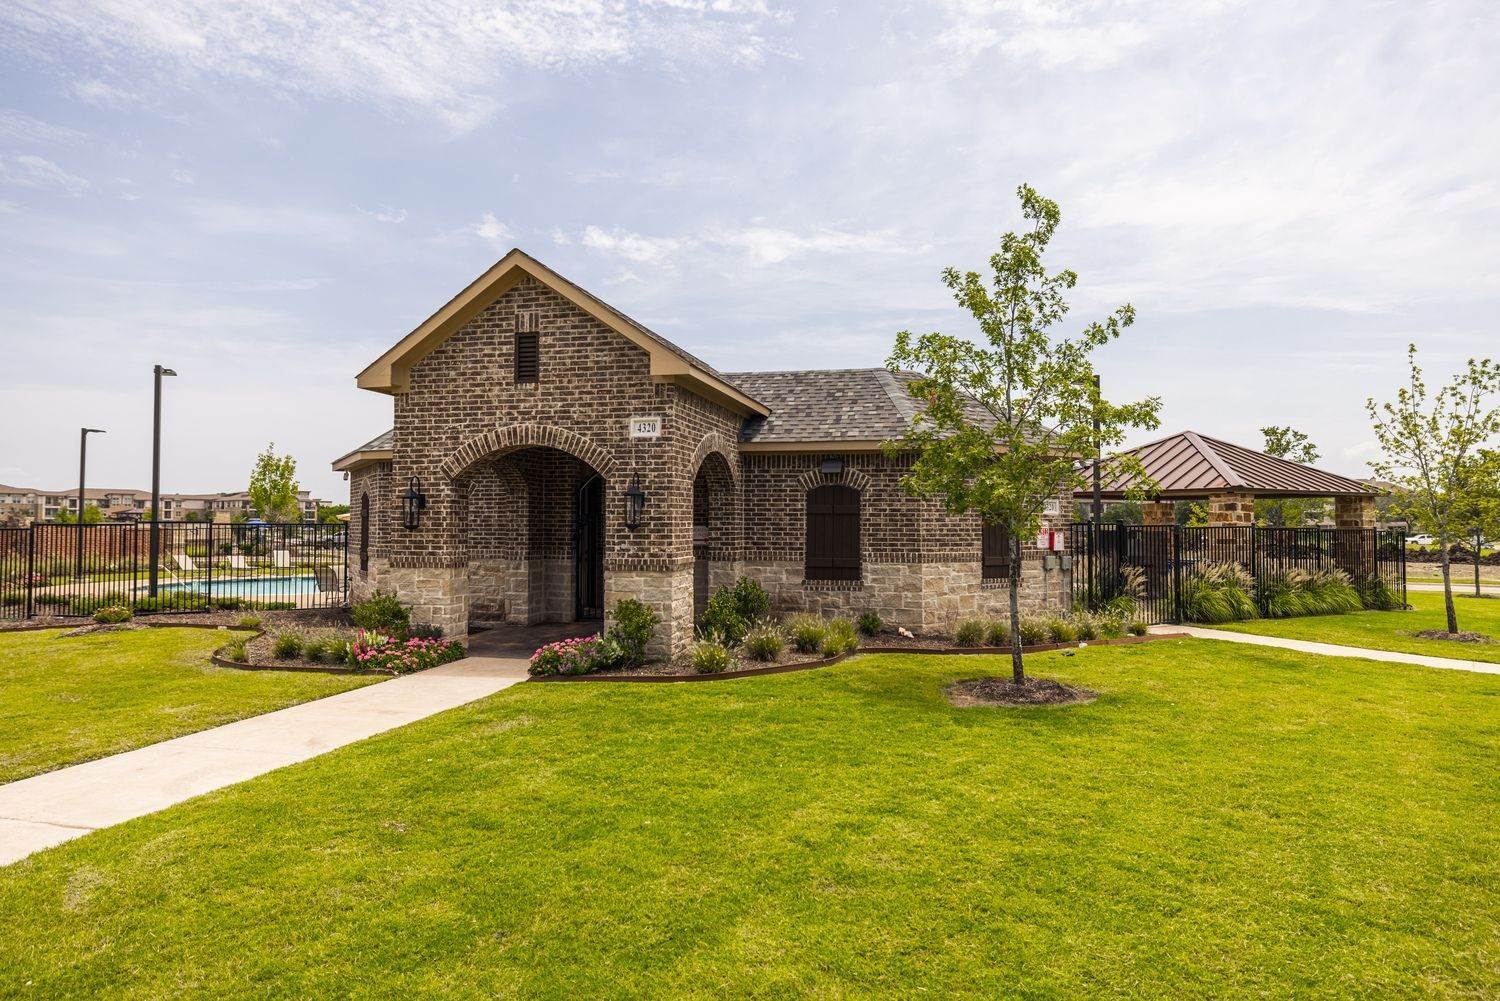 7. Wade Settlement Townhomes building at 4269 Willow Pond Drive, Frisco, TX 75034